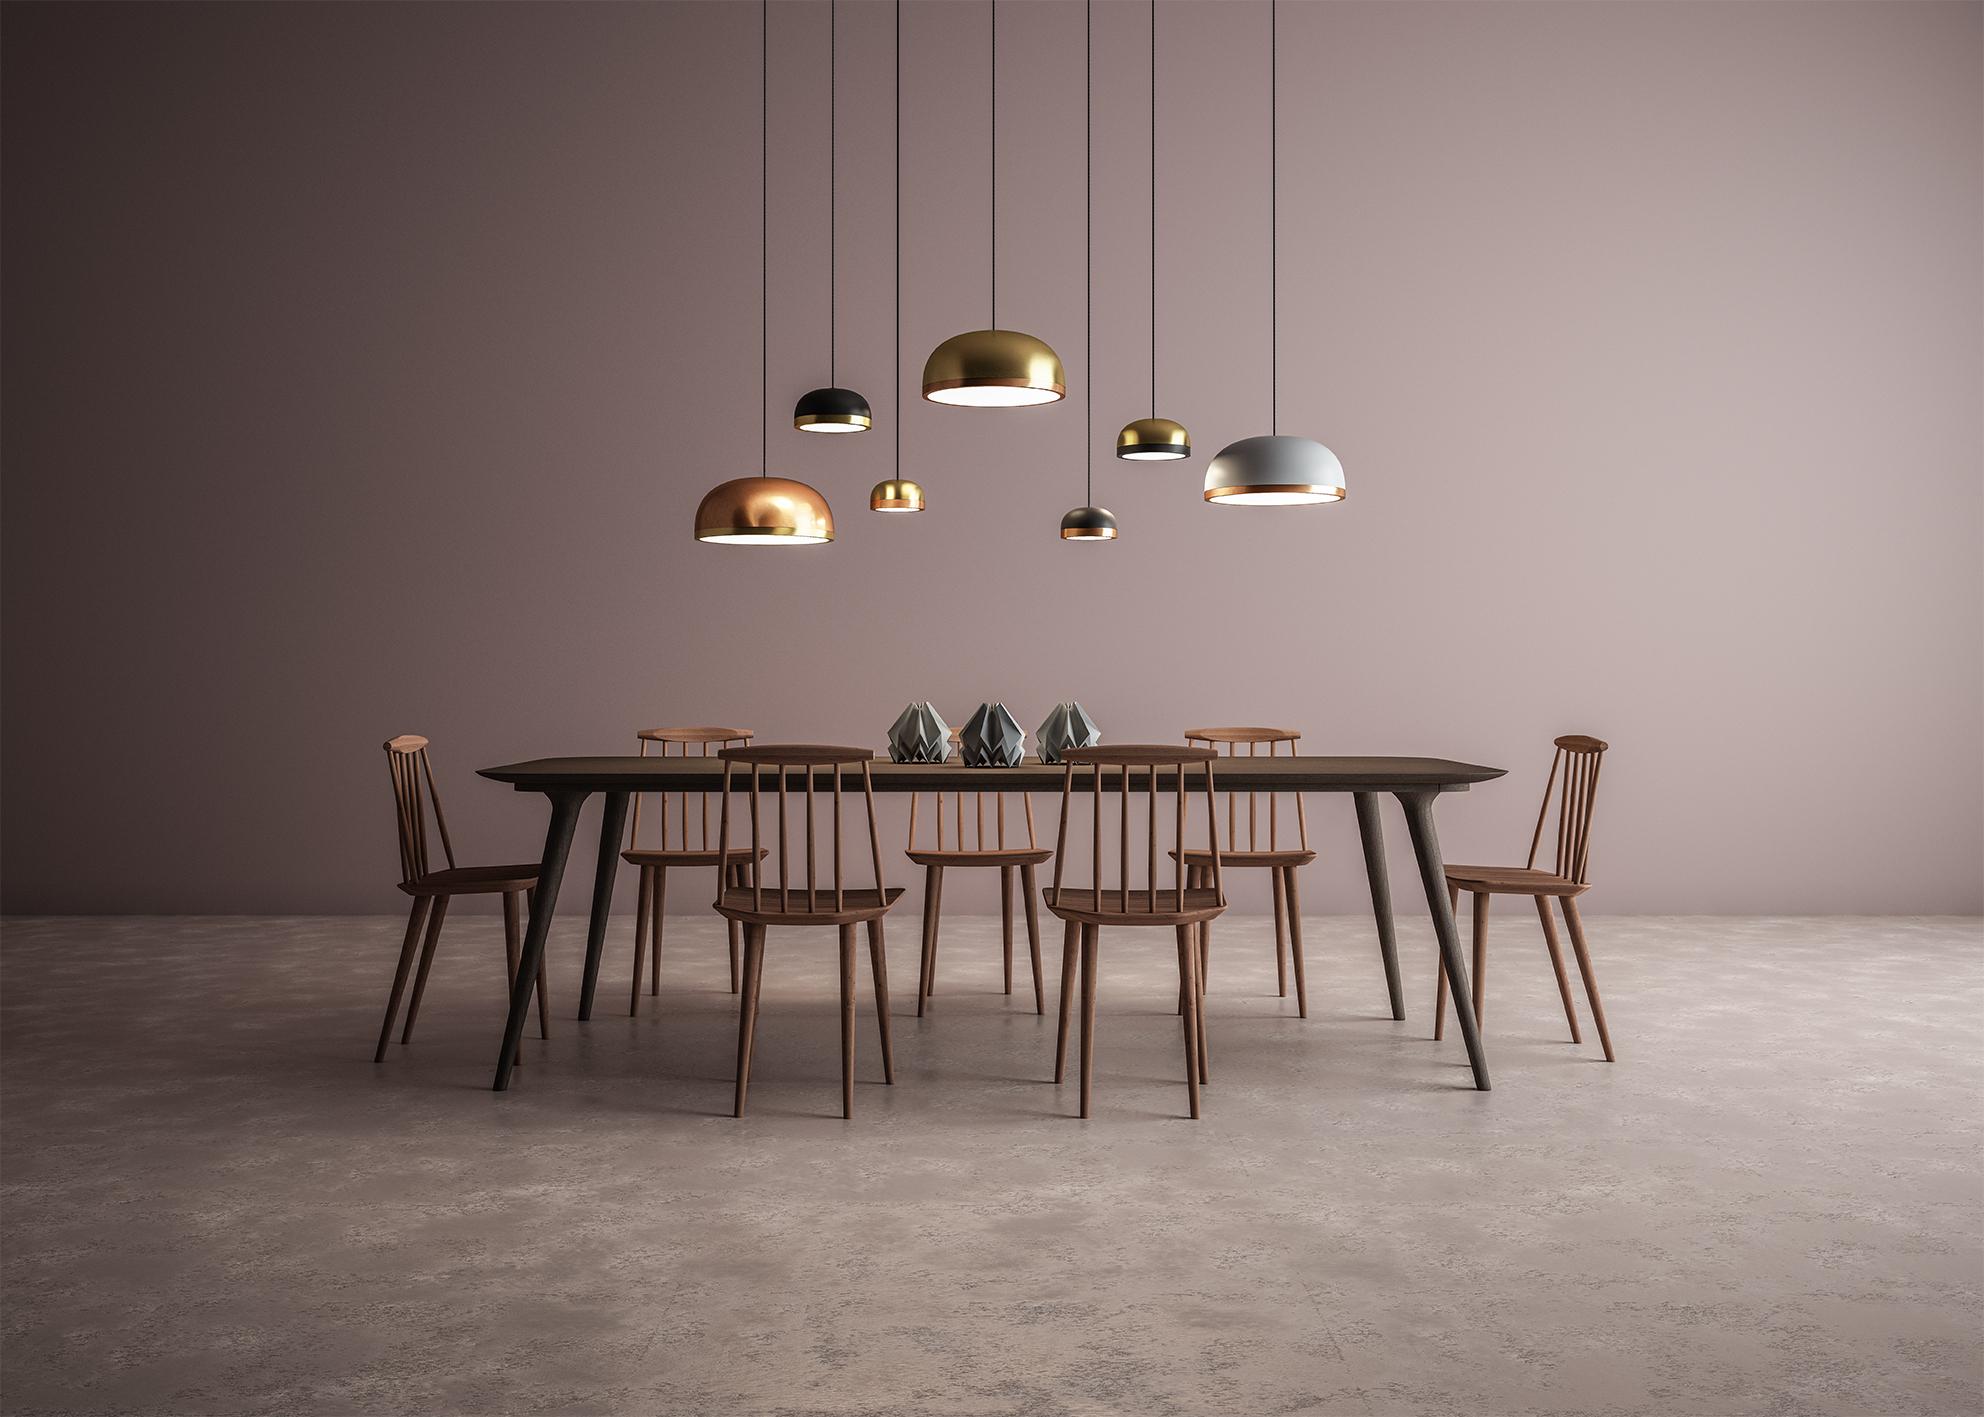 Pendant Lamp Molly 556.23 by TOOY
Designer: Corrado Dotti

Model shown: Copper dome  + Brushed brass ring
Dimensions: H. 17 x D. 20 cm
Source light: 1 x LED 220/240V , 1200 lumens,  12W Compliant with USA electric system
Adjustable direct light